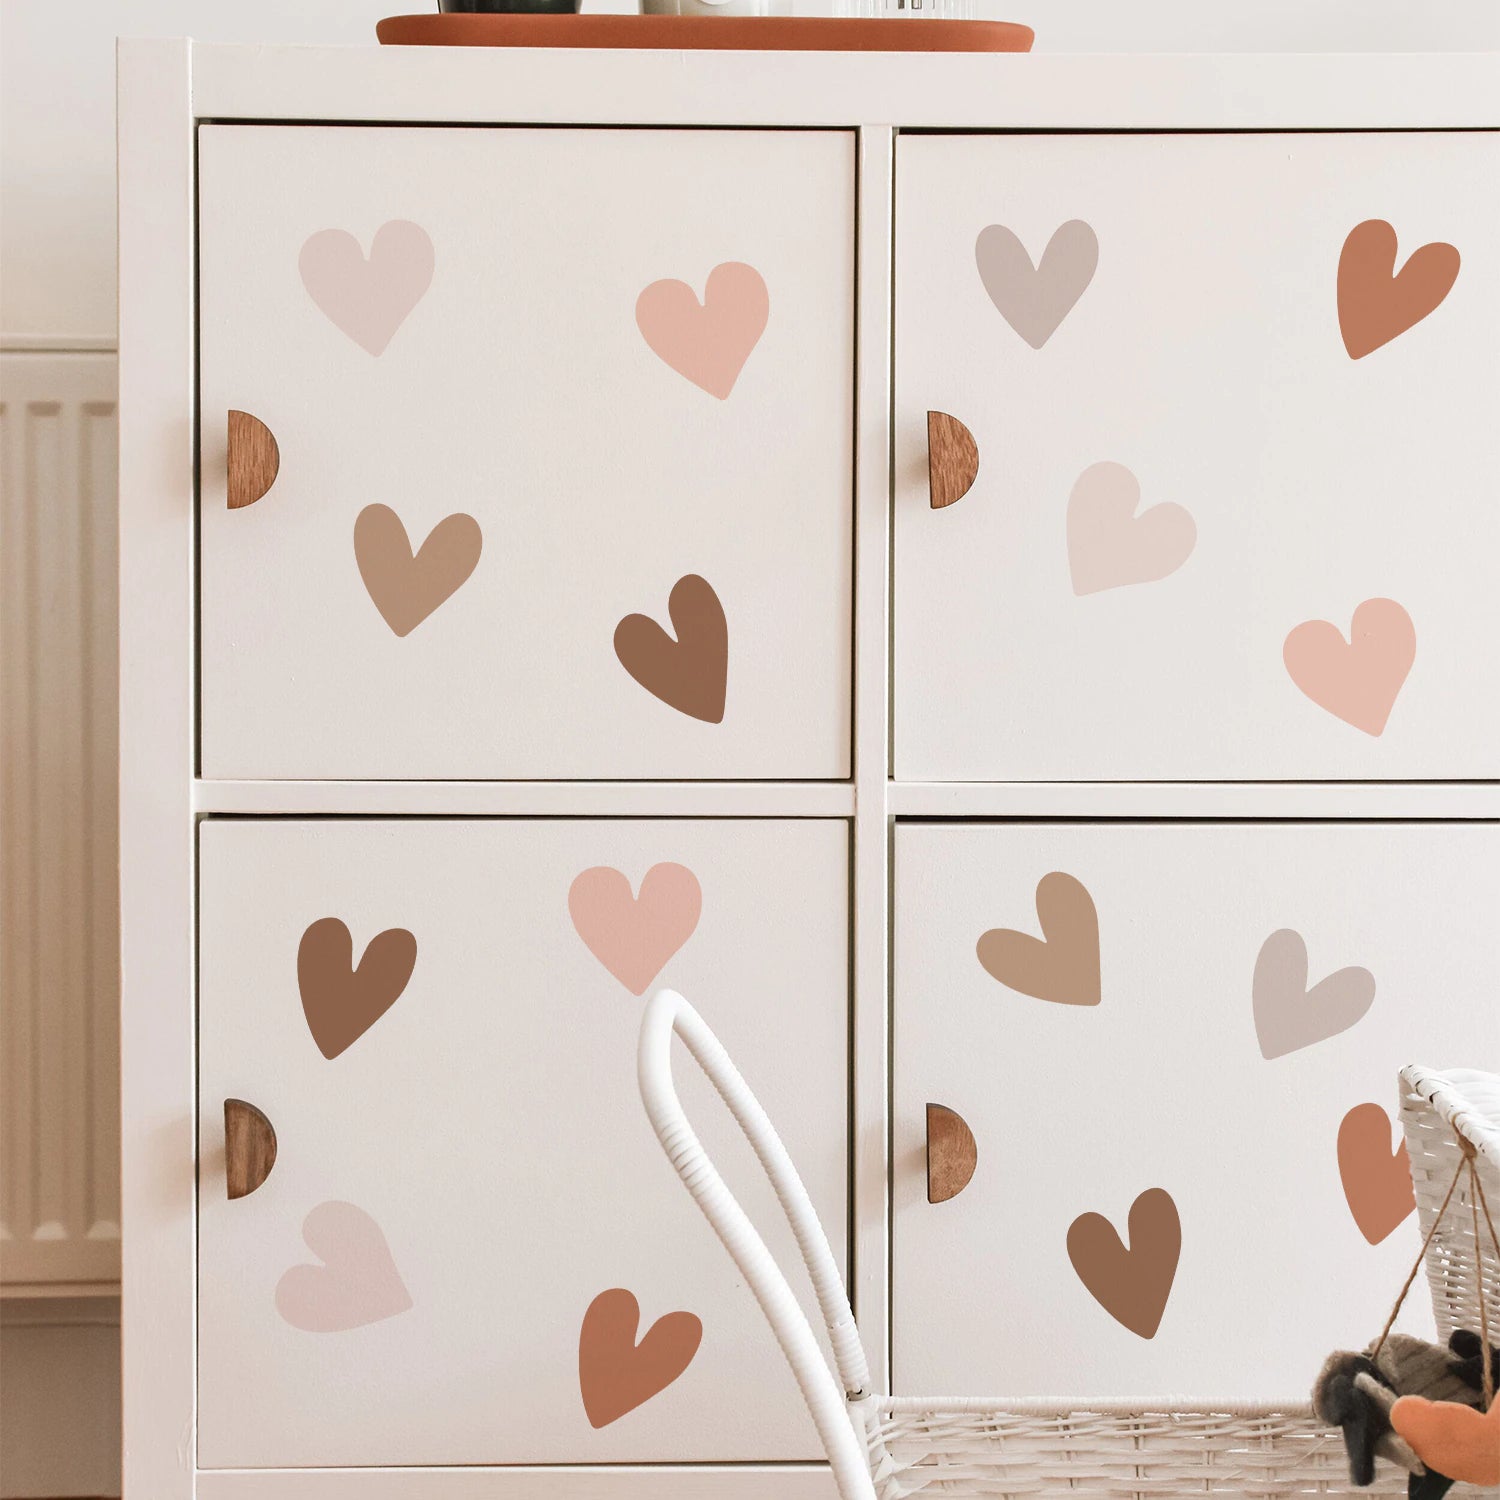 Cute Bohemian Hearts Wall Decals Neutral Colors Beige Brown Pink Hearts Removable PVC Wall Stickers For Baby's Room Children's Bedroom Nursery Art Decor